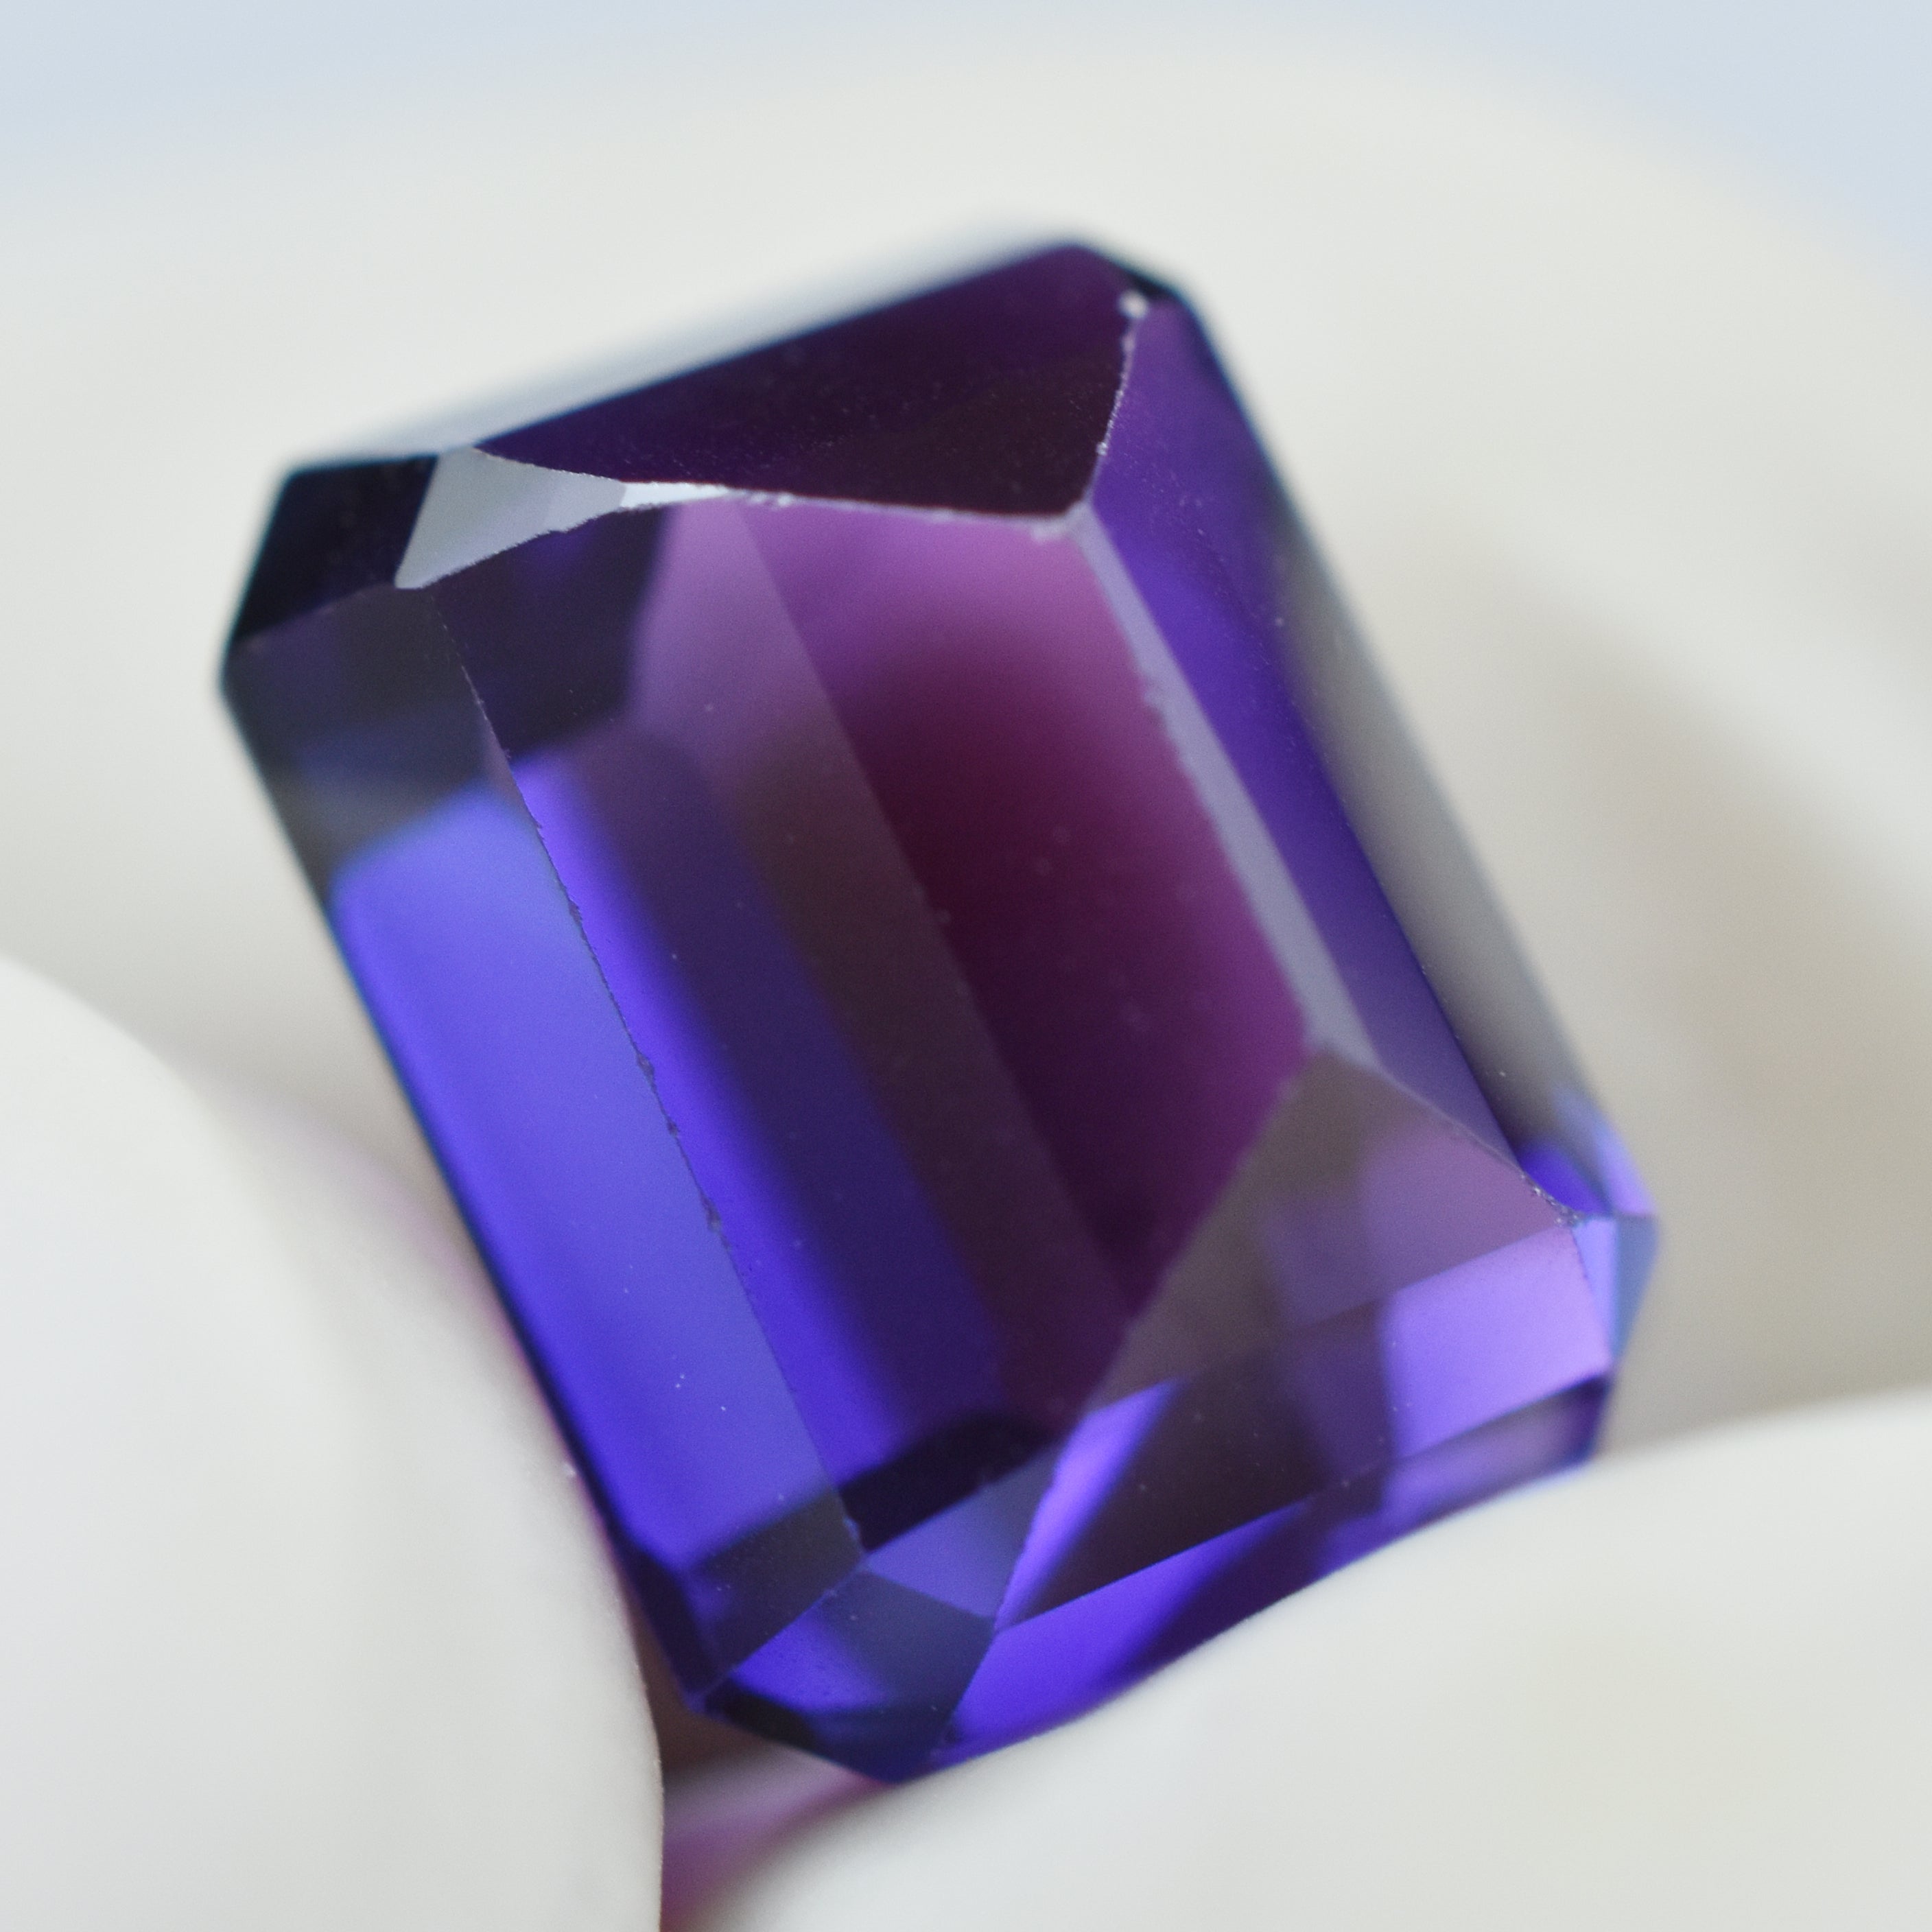 SALE !! Natural Sapphire Purple Emerald Shape Certified 9.63 Ct Rare Loose Gemstone  Loose Gemstone Certified/AAA Top Quality Gemstone/Ring & Jewelry Making Gems Gift For Her/him